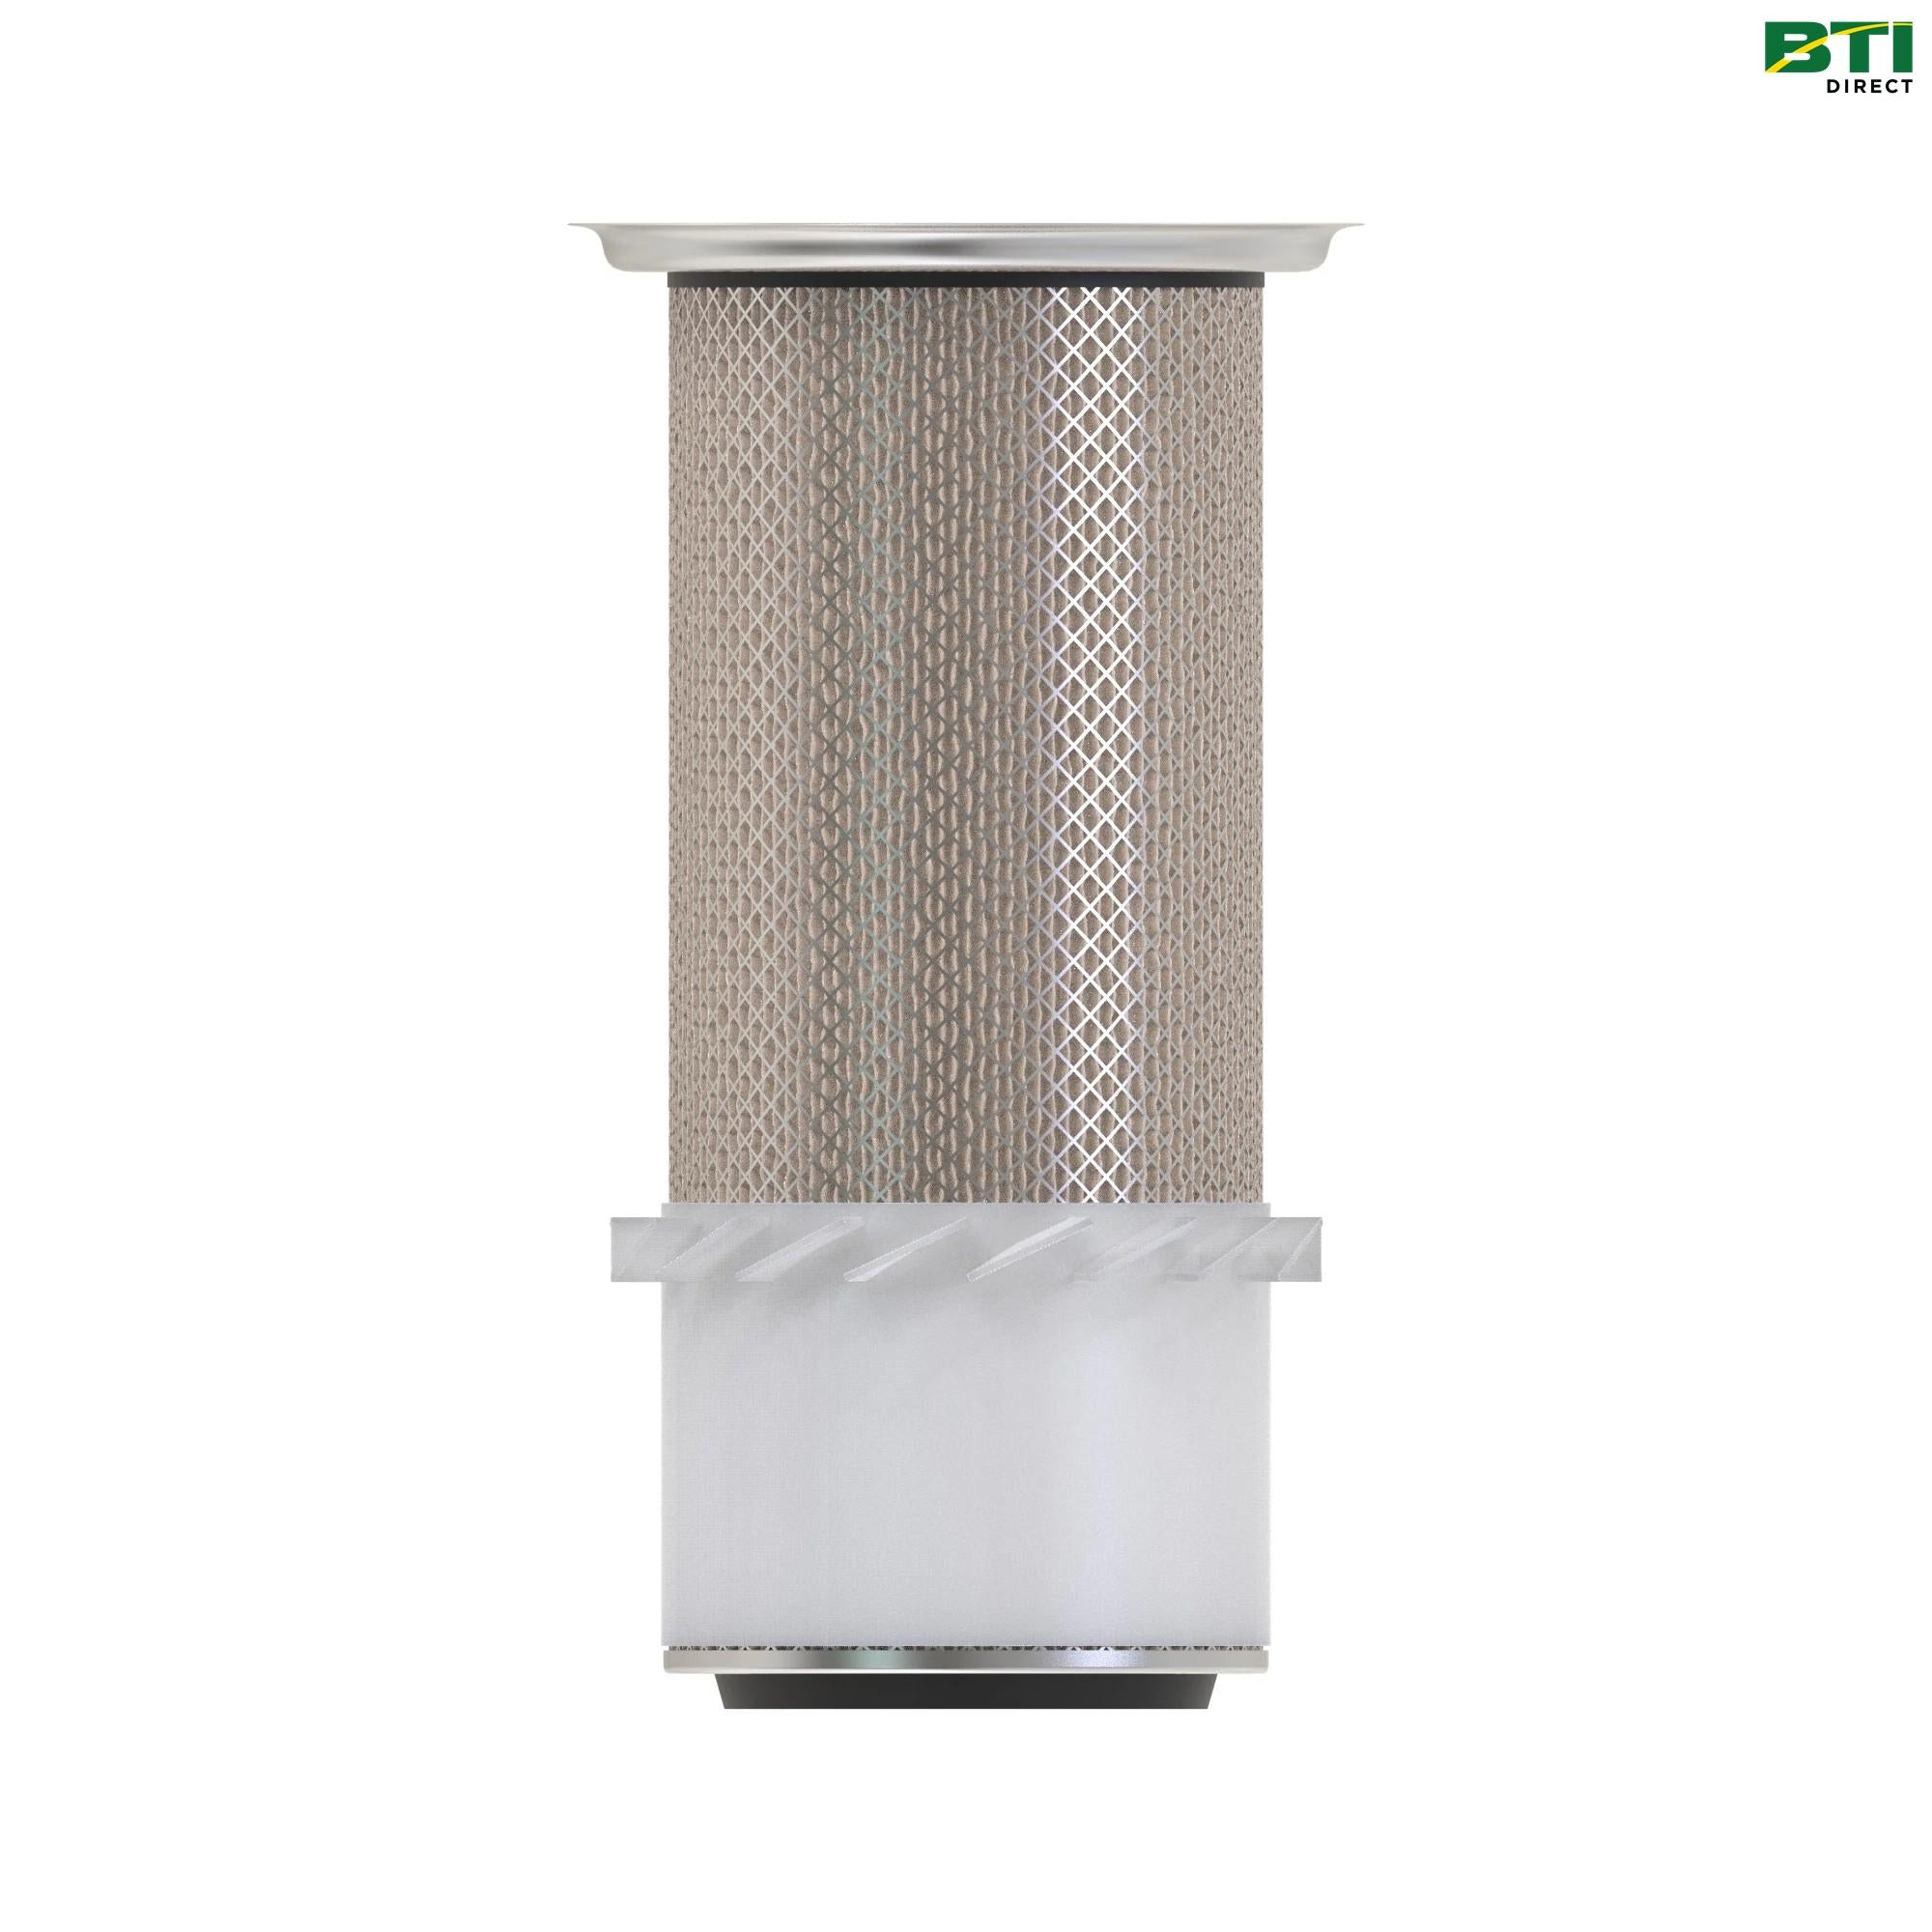 AR84228: Primary Air Filter Element